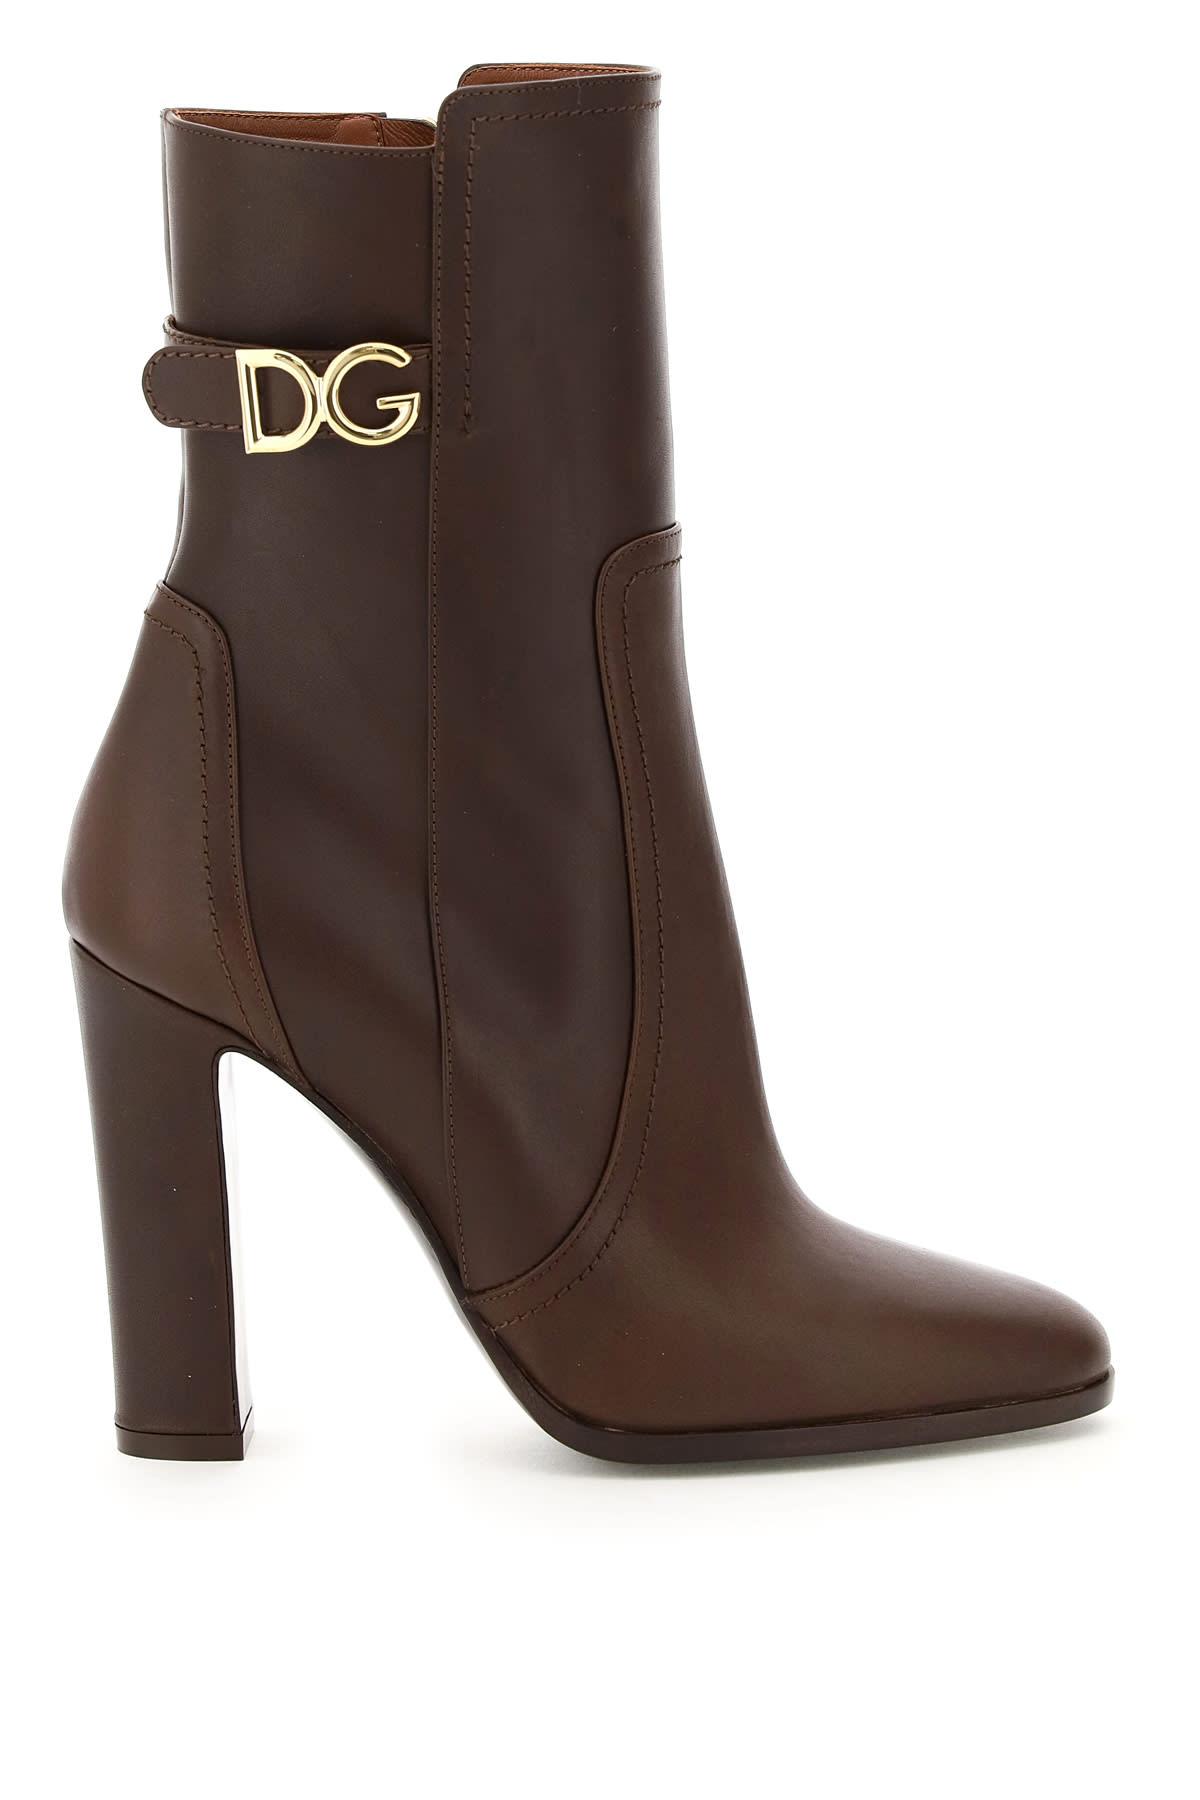 Buy Dolce & Gabbana Dg Caroline Ankle Boots online, shop Dolce & Gabbana shoes with free shipping